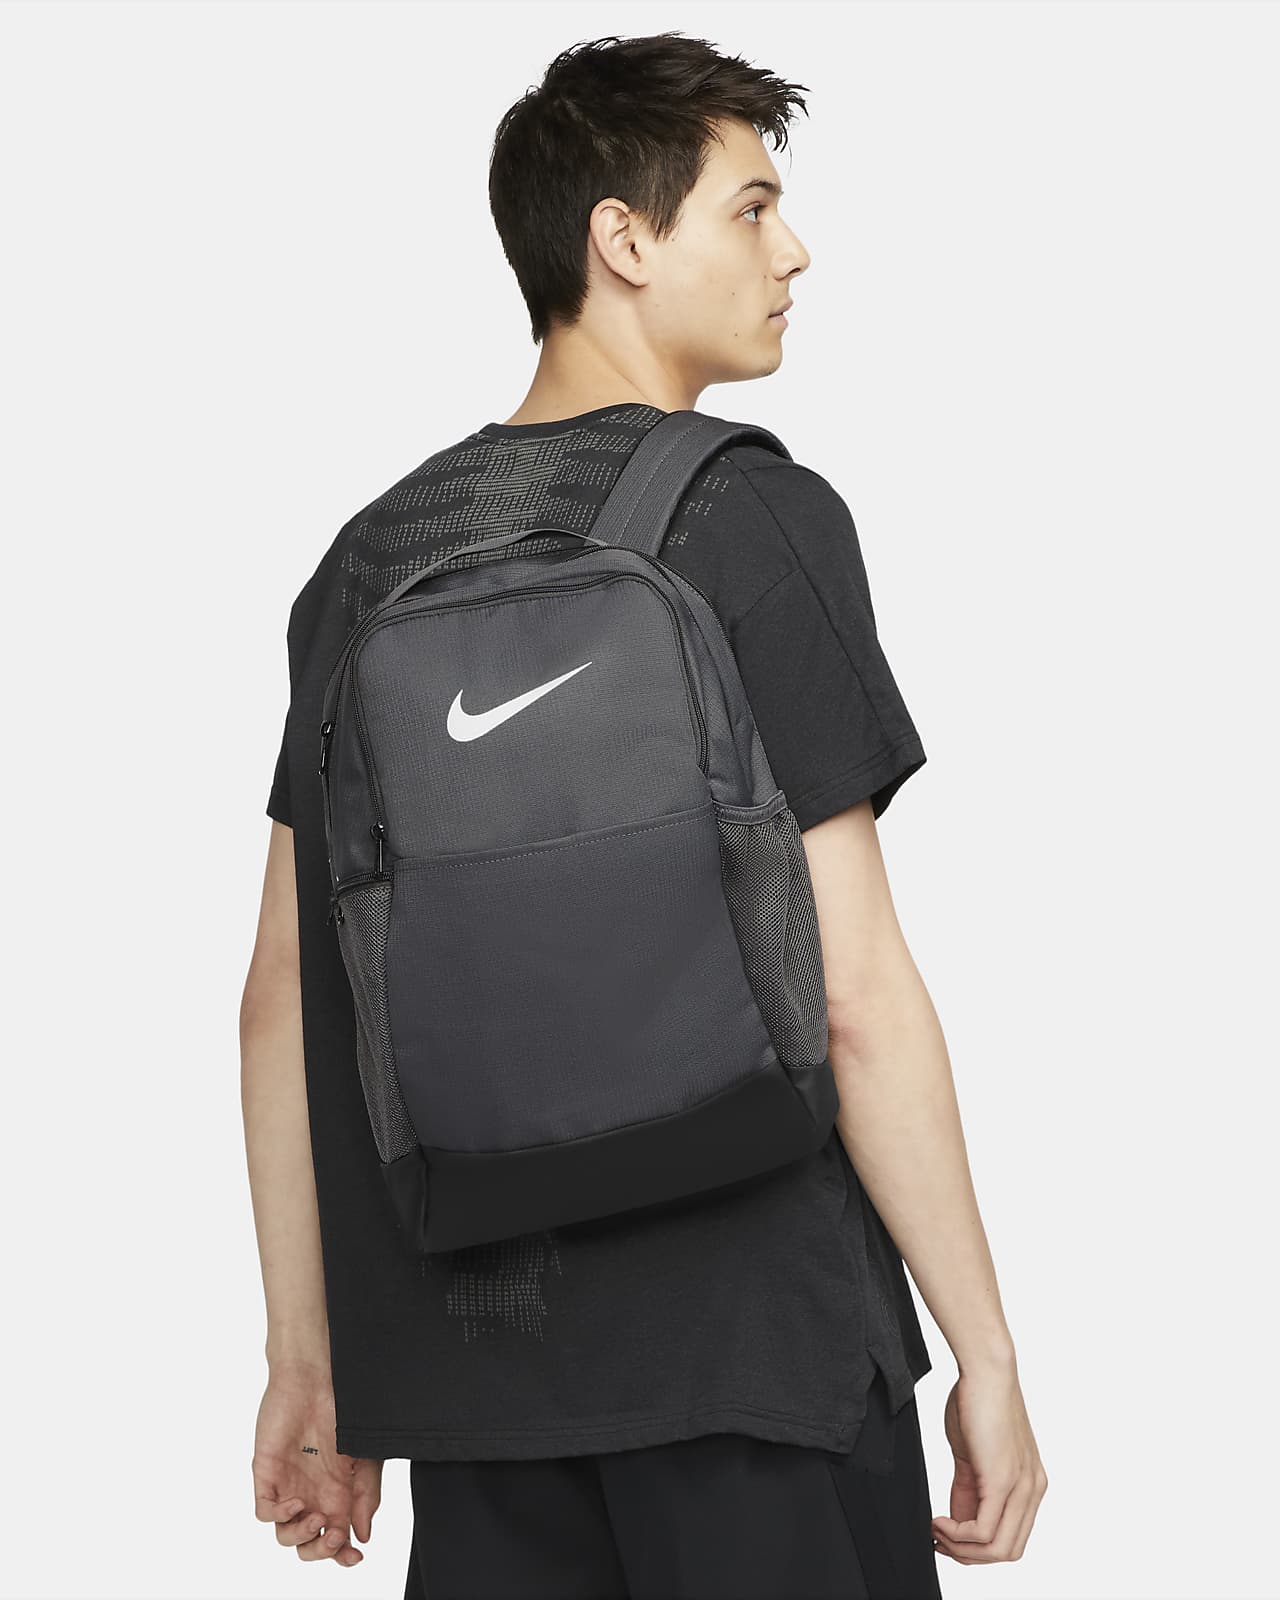 Nike Brasilia 9.5 Medium Backpack Geode Green Grab your gear and get going  with the Nike Brasilia Backpack. It has plenty of pockets to help you stay  organized including a sleeve to